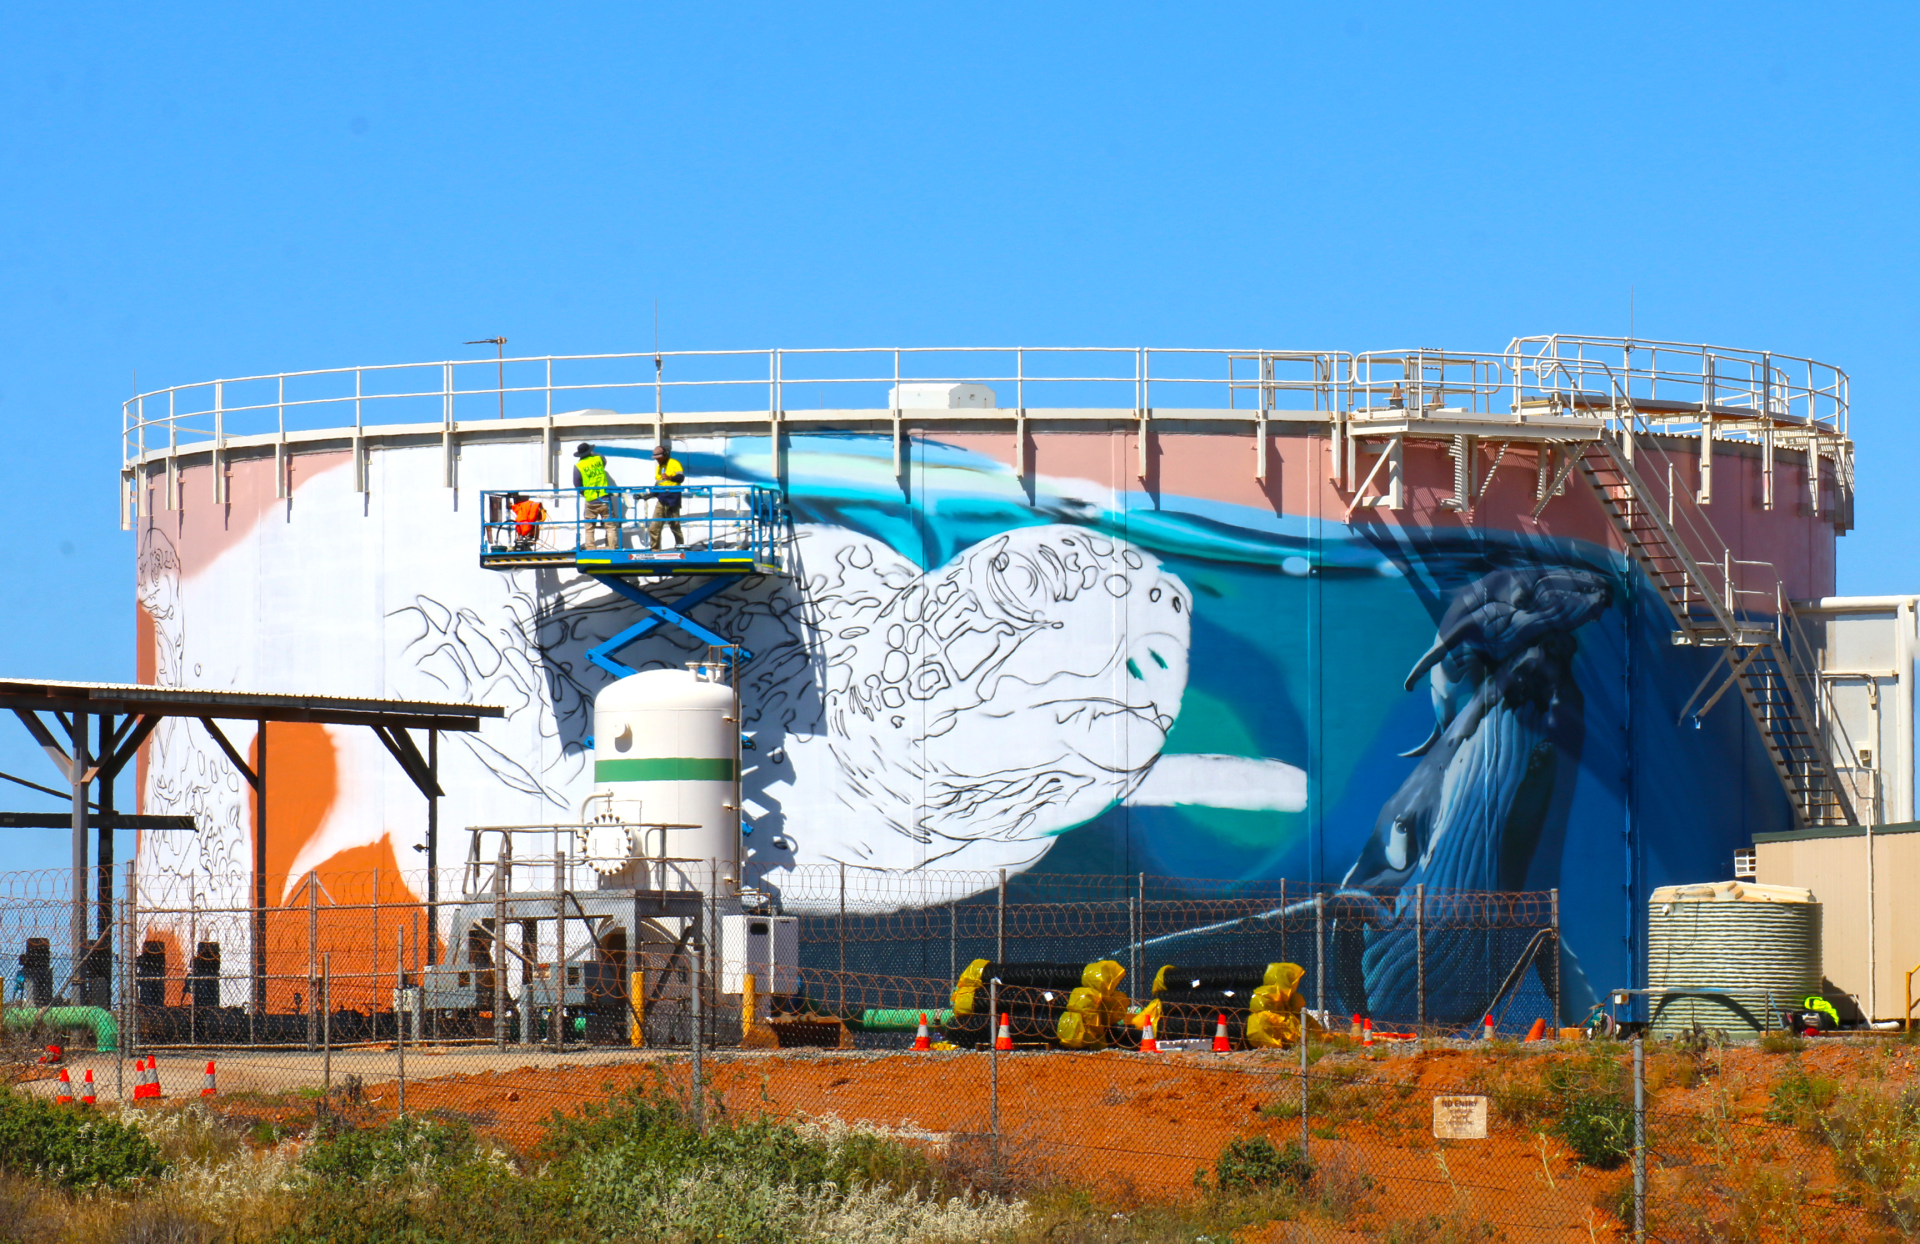 Onslow Water Tank Mural Project commences